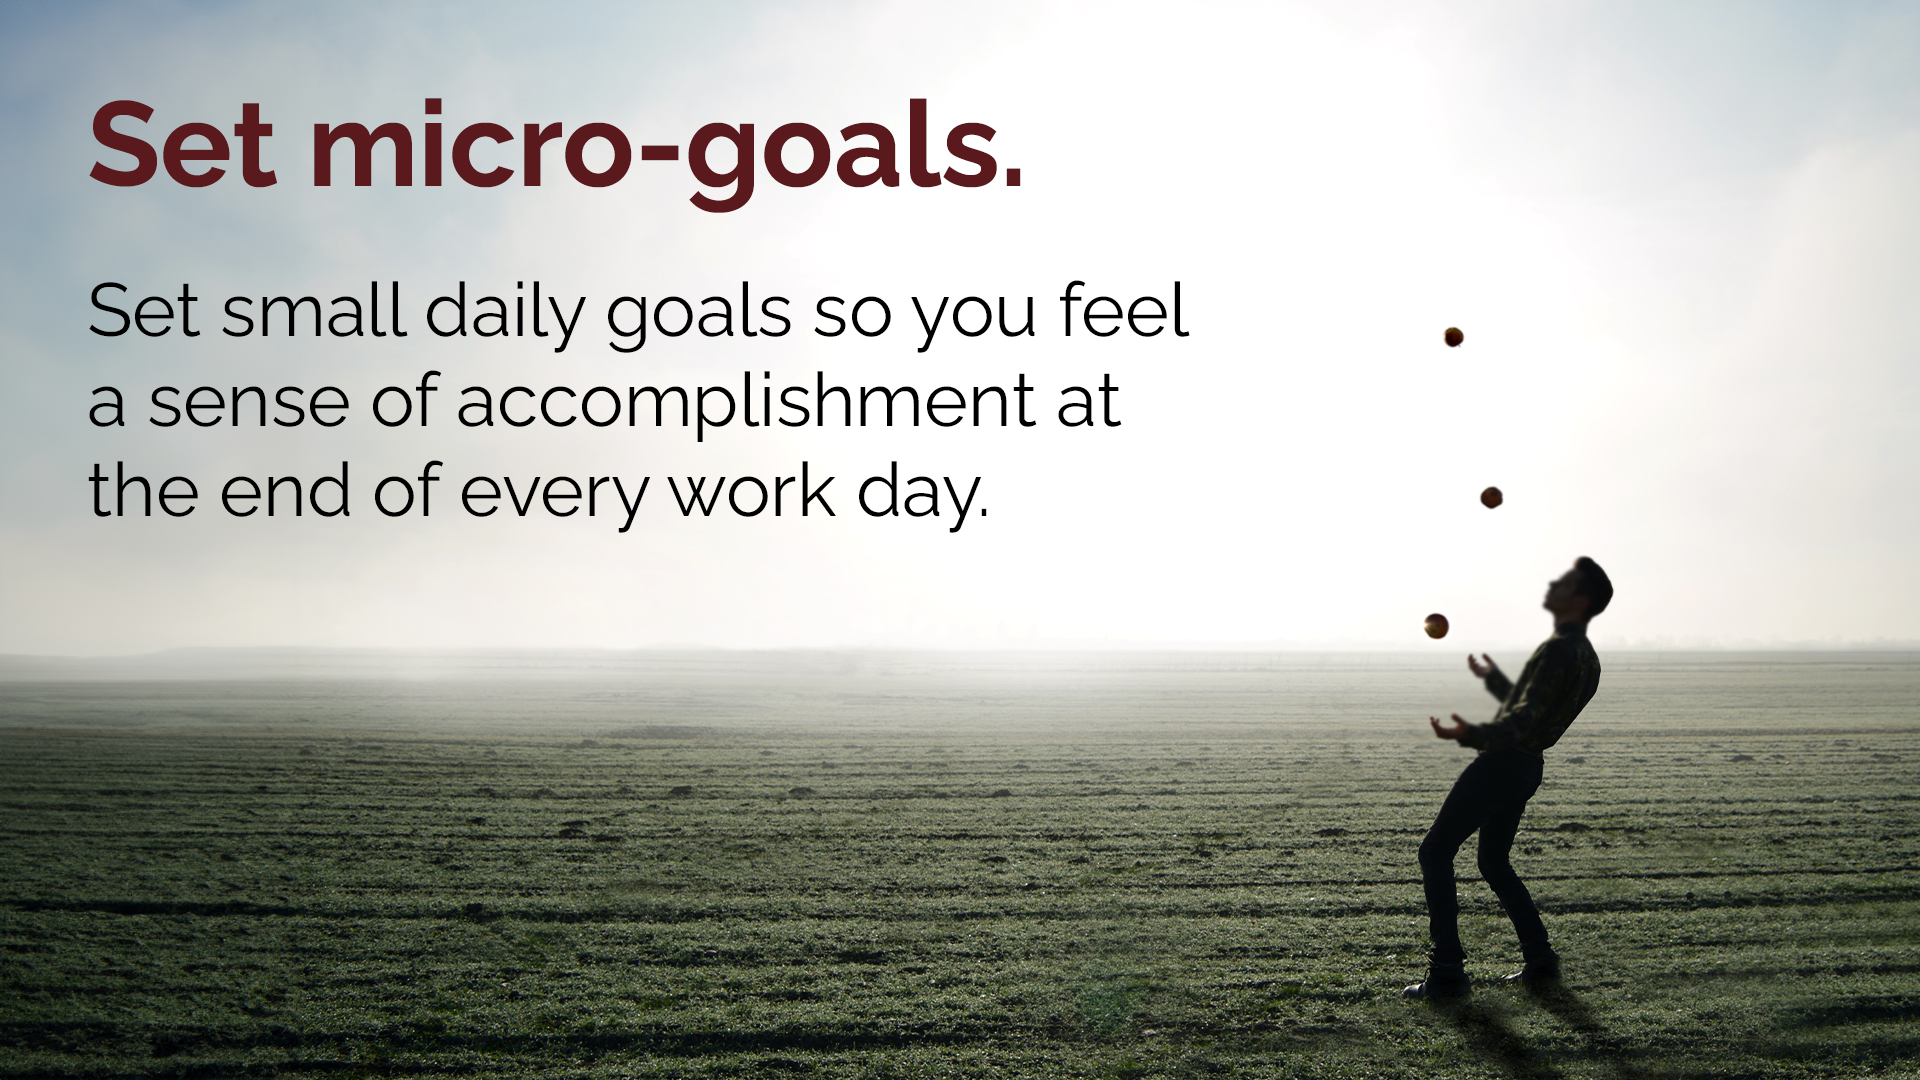 Free Graphic | Workplace Wellness | Set Micro-Goals